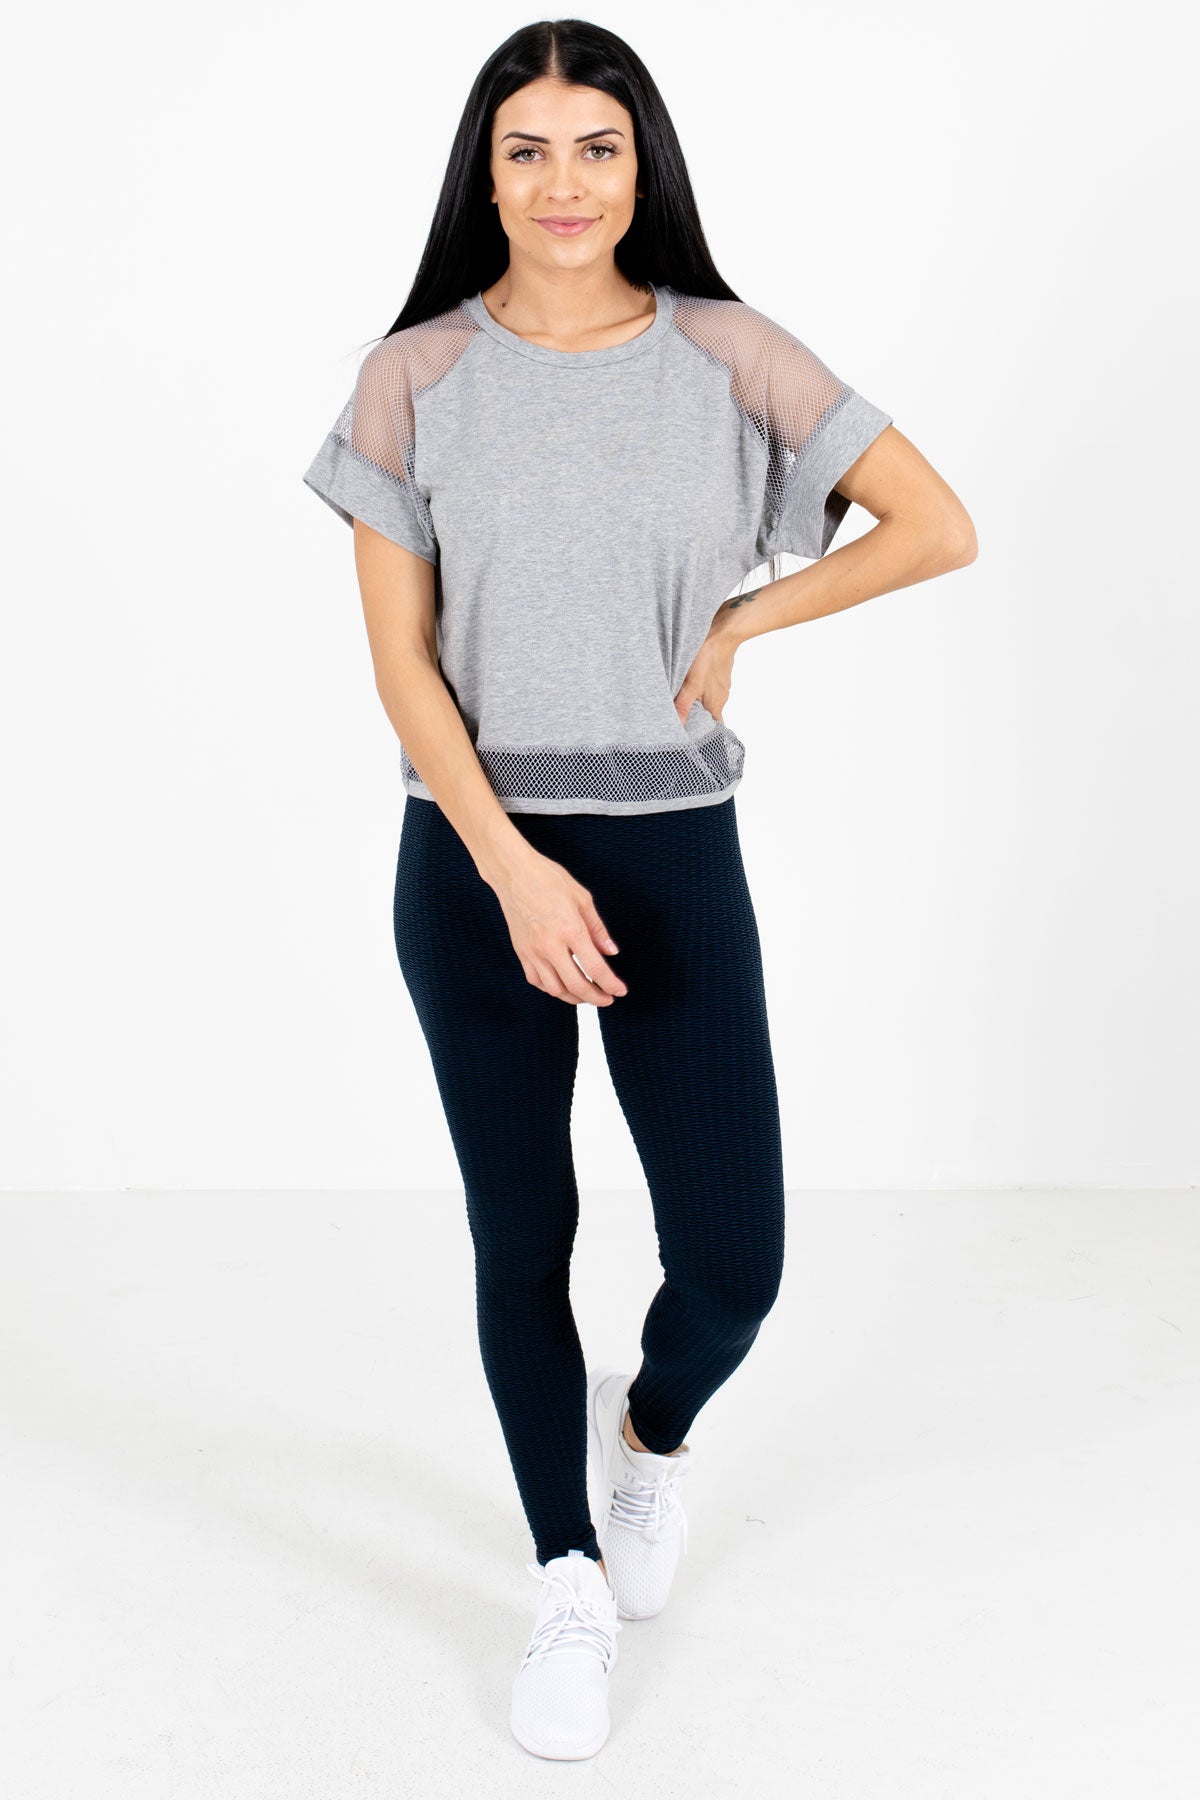 Women’s Heather Gray Workout Boutique Clothing